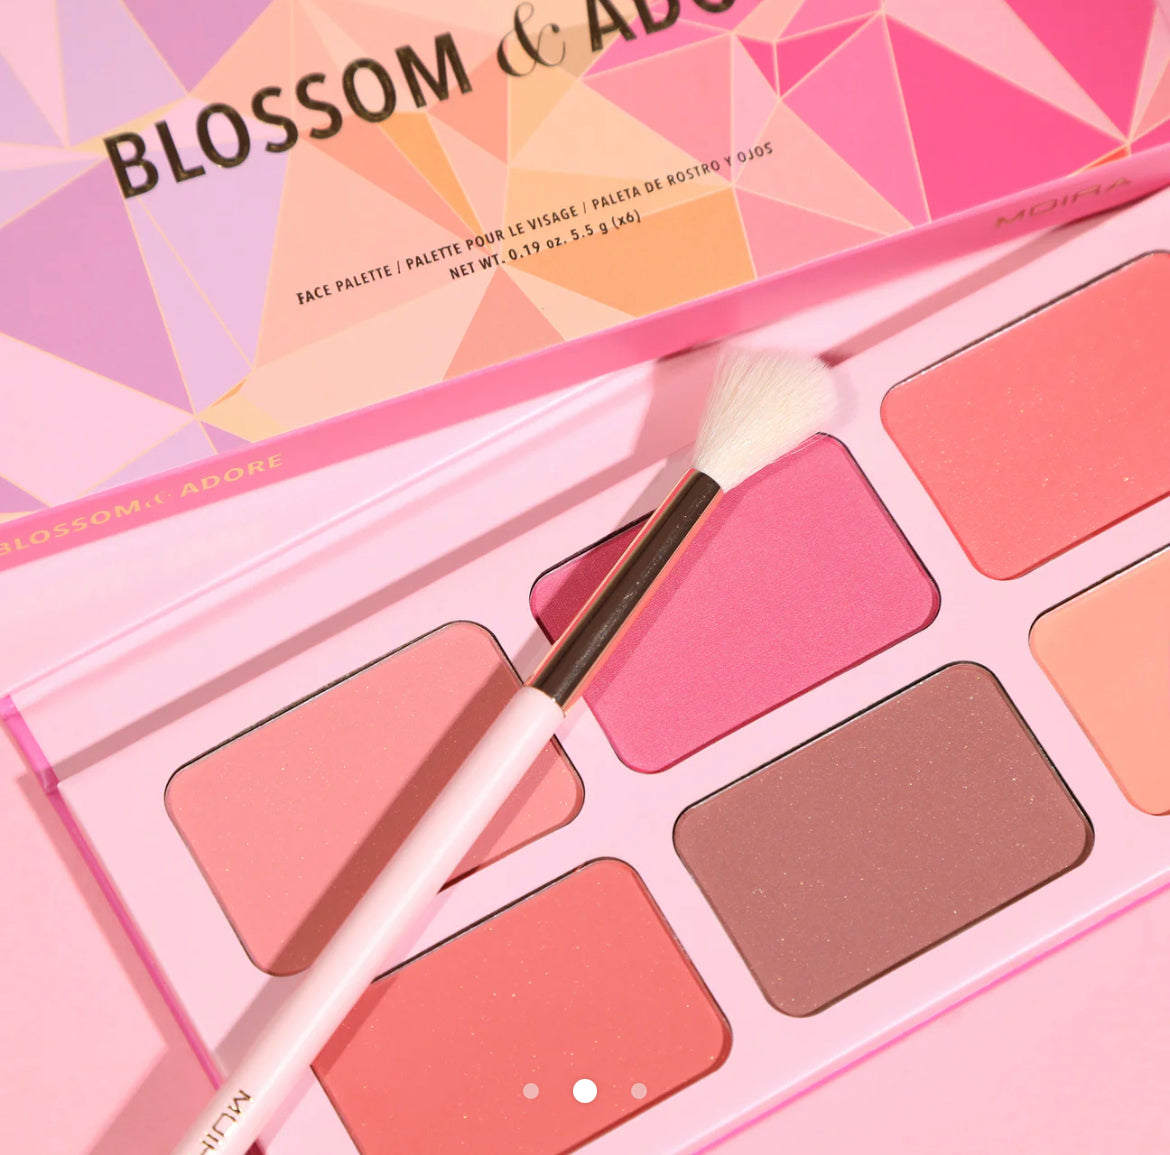 Moira Blossom and Adore Palette